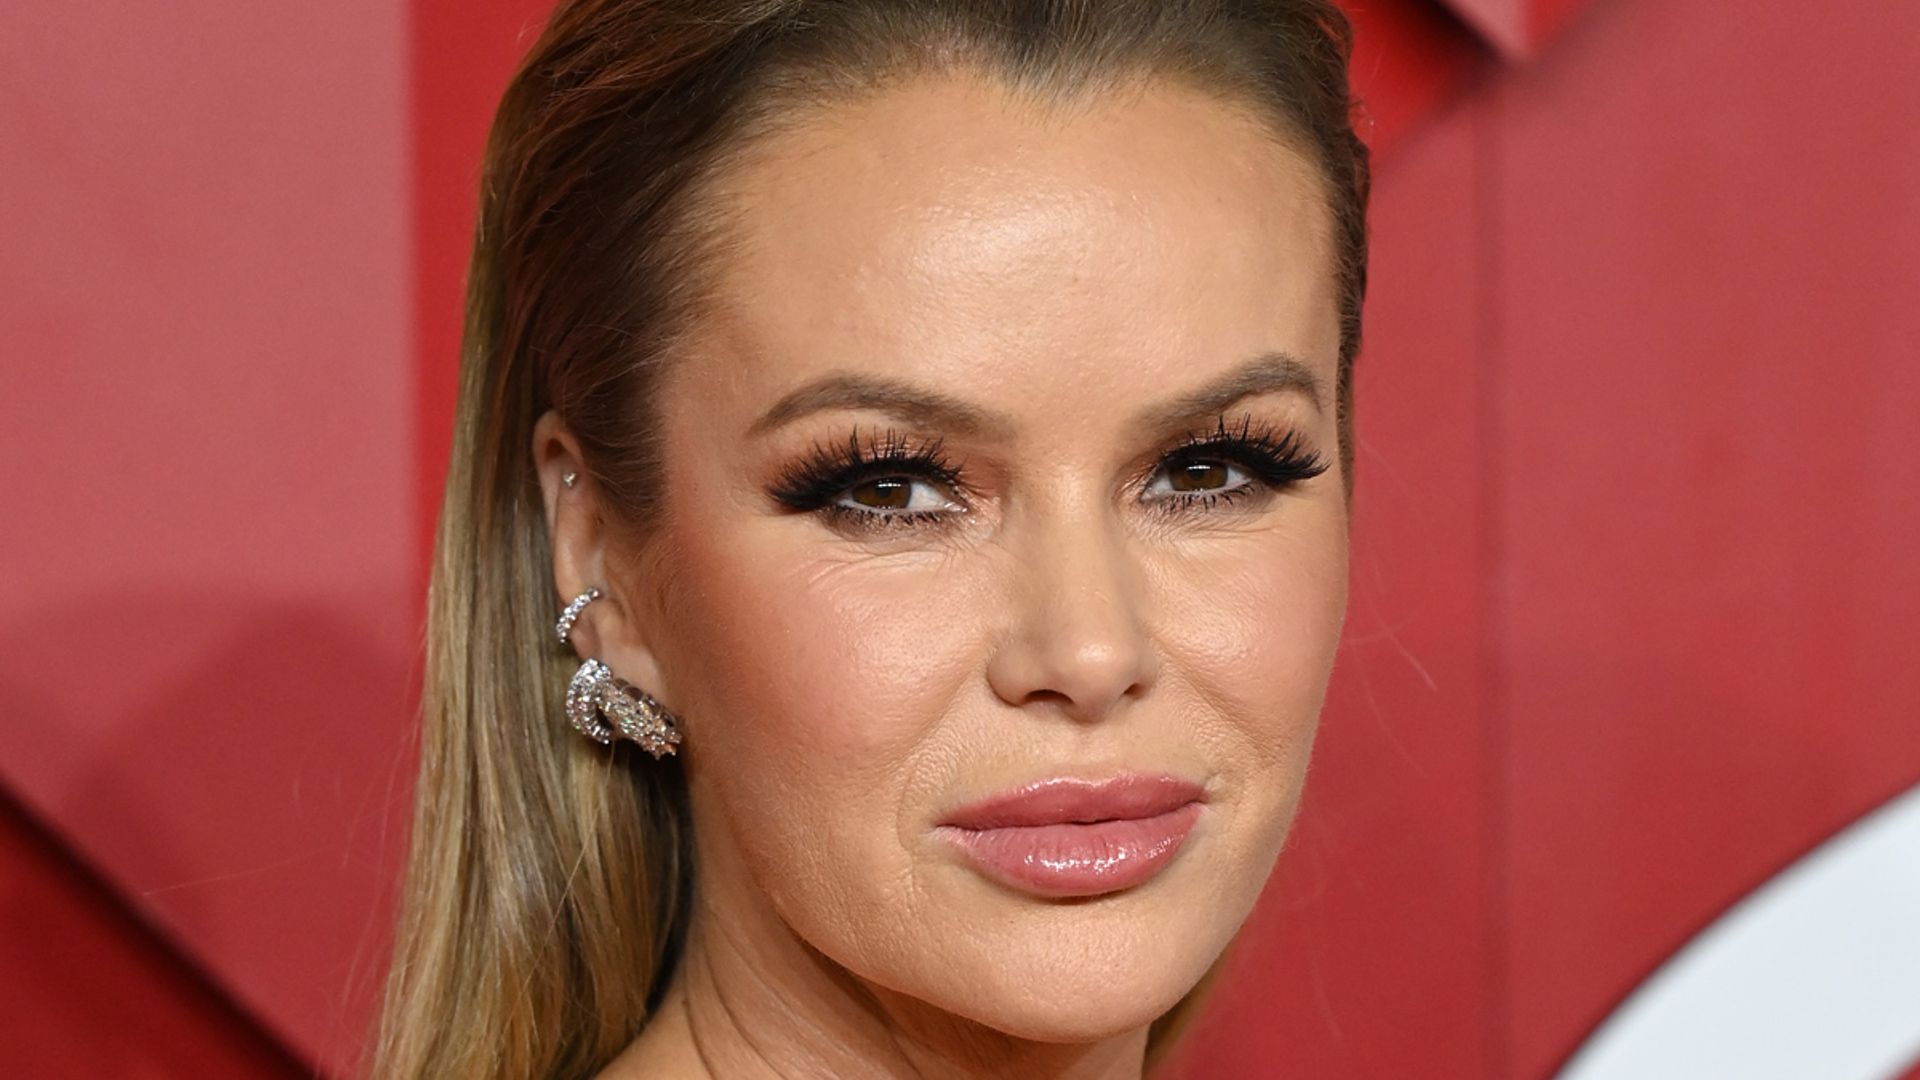 Amanda Holden opts for an eye-catching look in a pink trouser suit and  heels